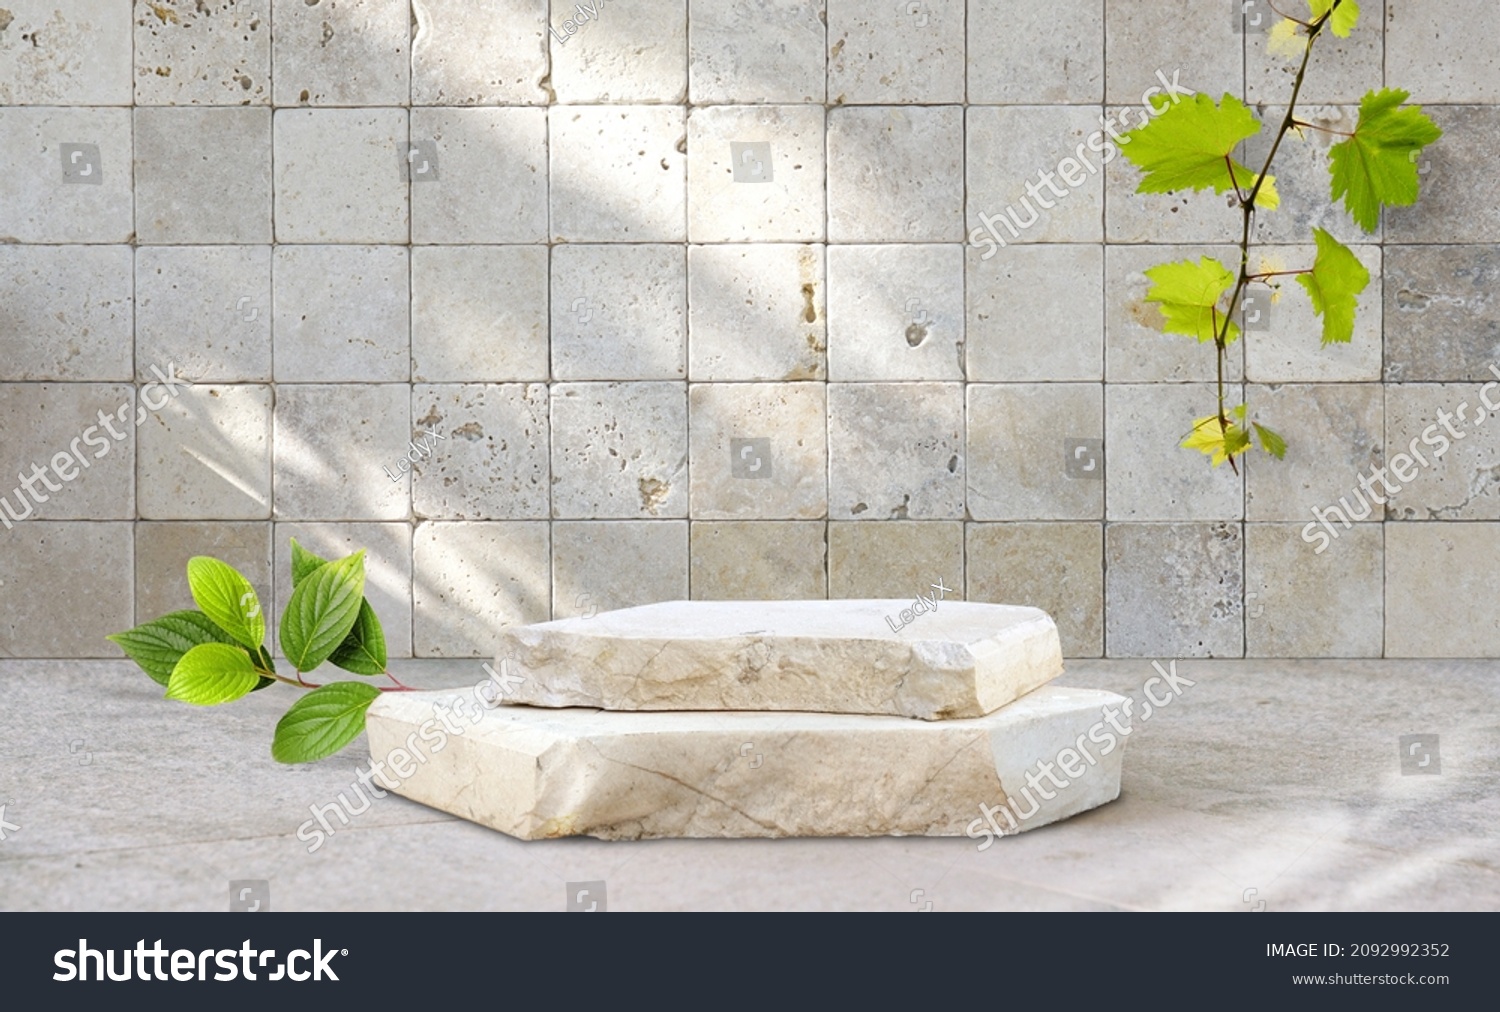 Original template for spa product presentation. Pedestal of marble slabs and branches with green leaves  against  background of wall in bathroom with masonry in light beige colors. #2092992352